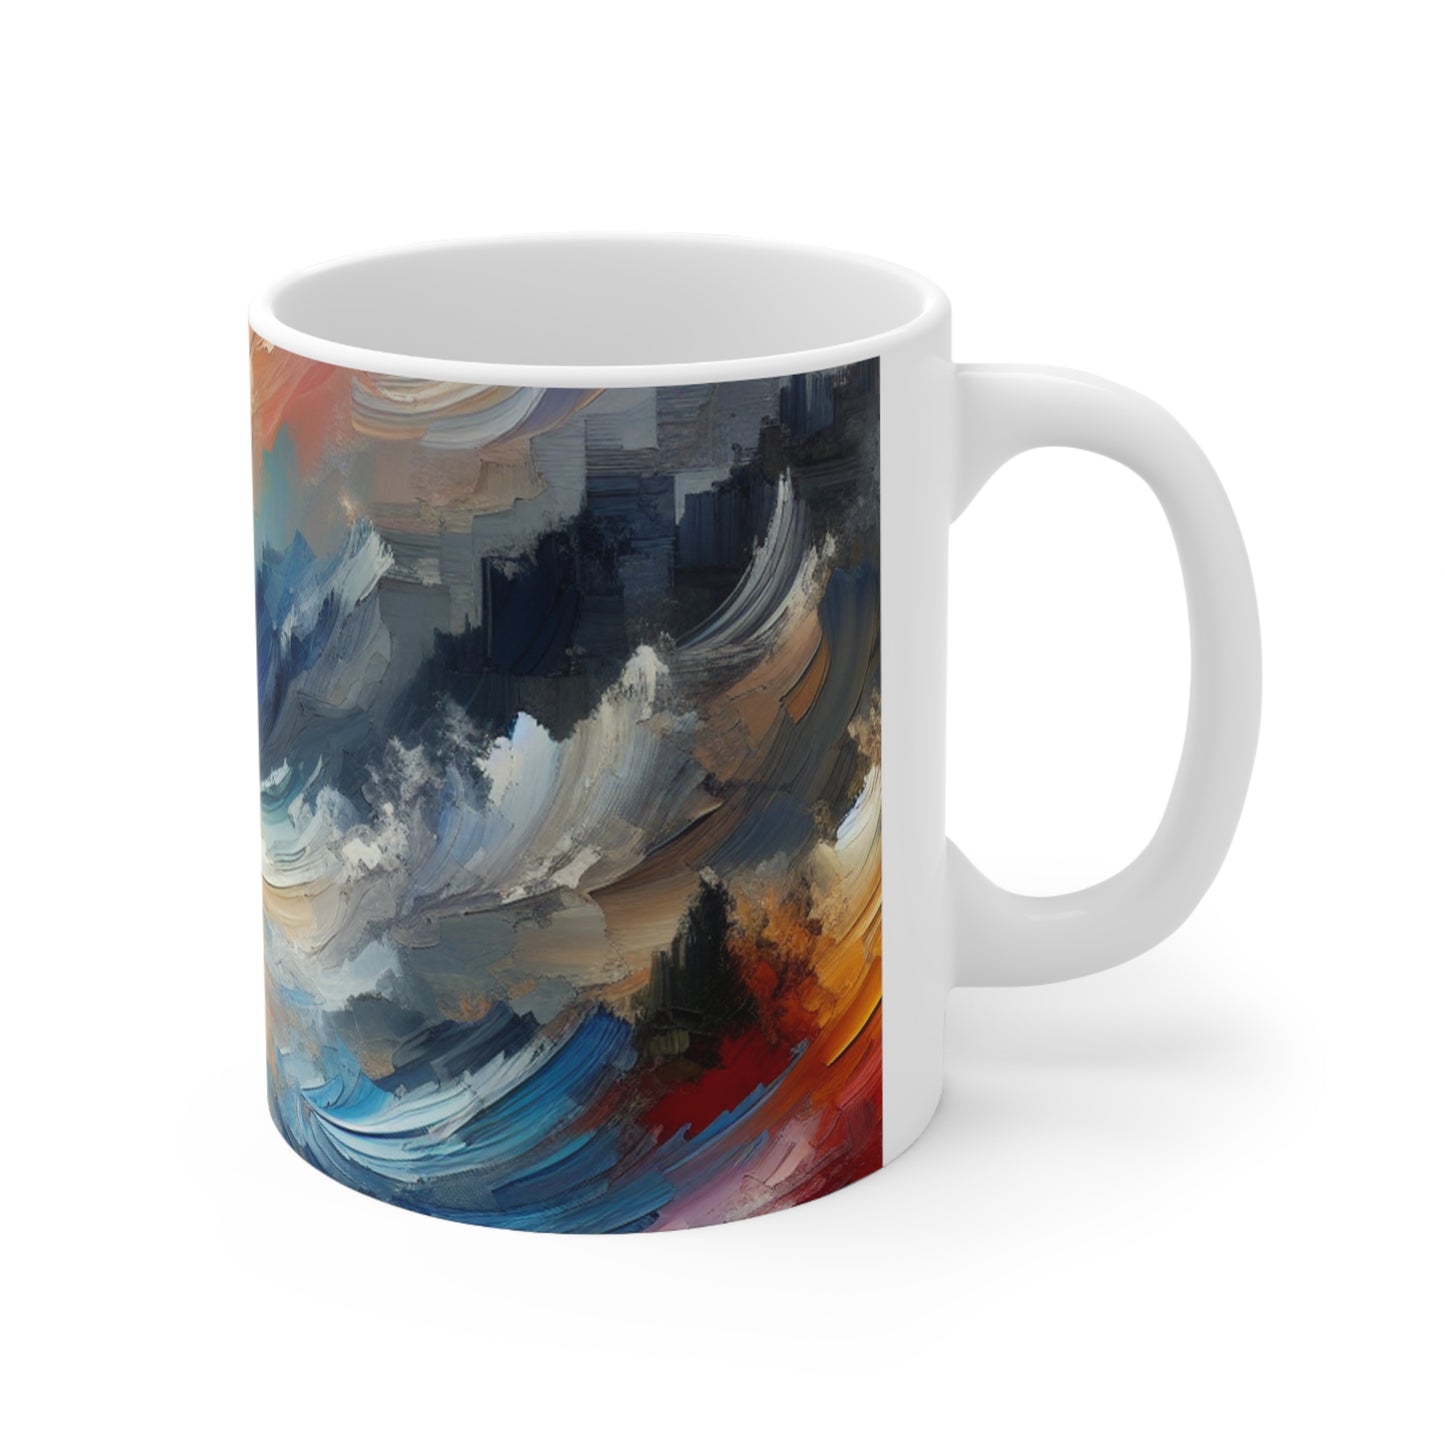 "Abstract Landscape: Exploring Emotional Depths Through Color & Texture" - The Alien Ceramic Mug 11oz Abstract Expressionism Style